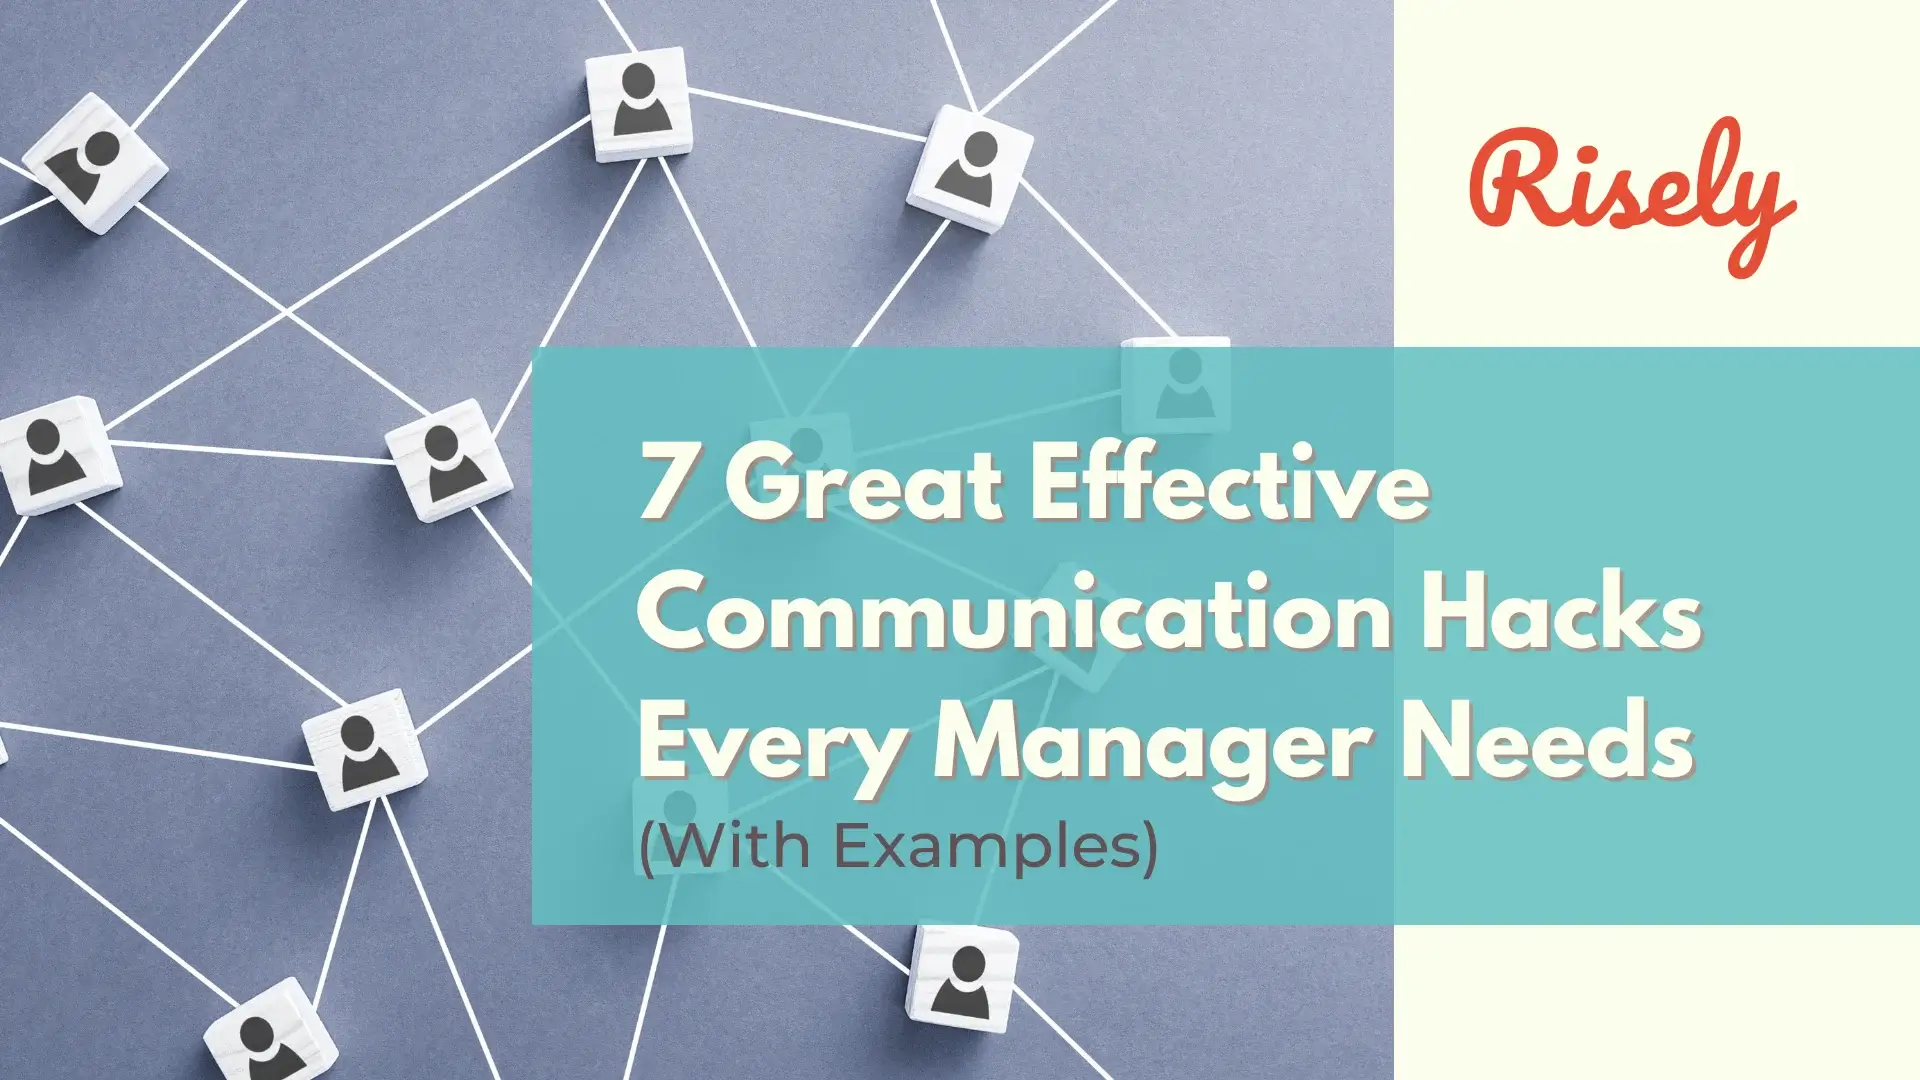 7 Great Effective Communication Hacks Every Manager Needs (With Examples)